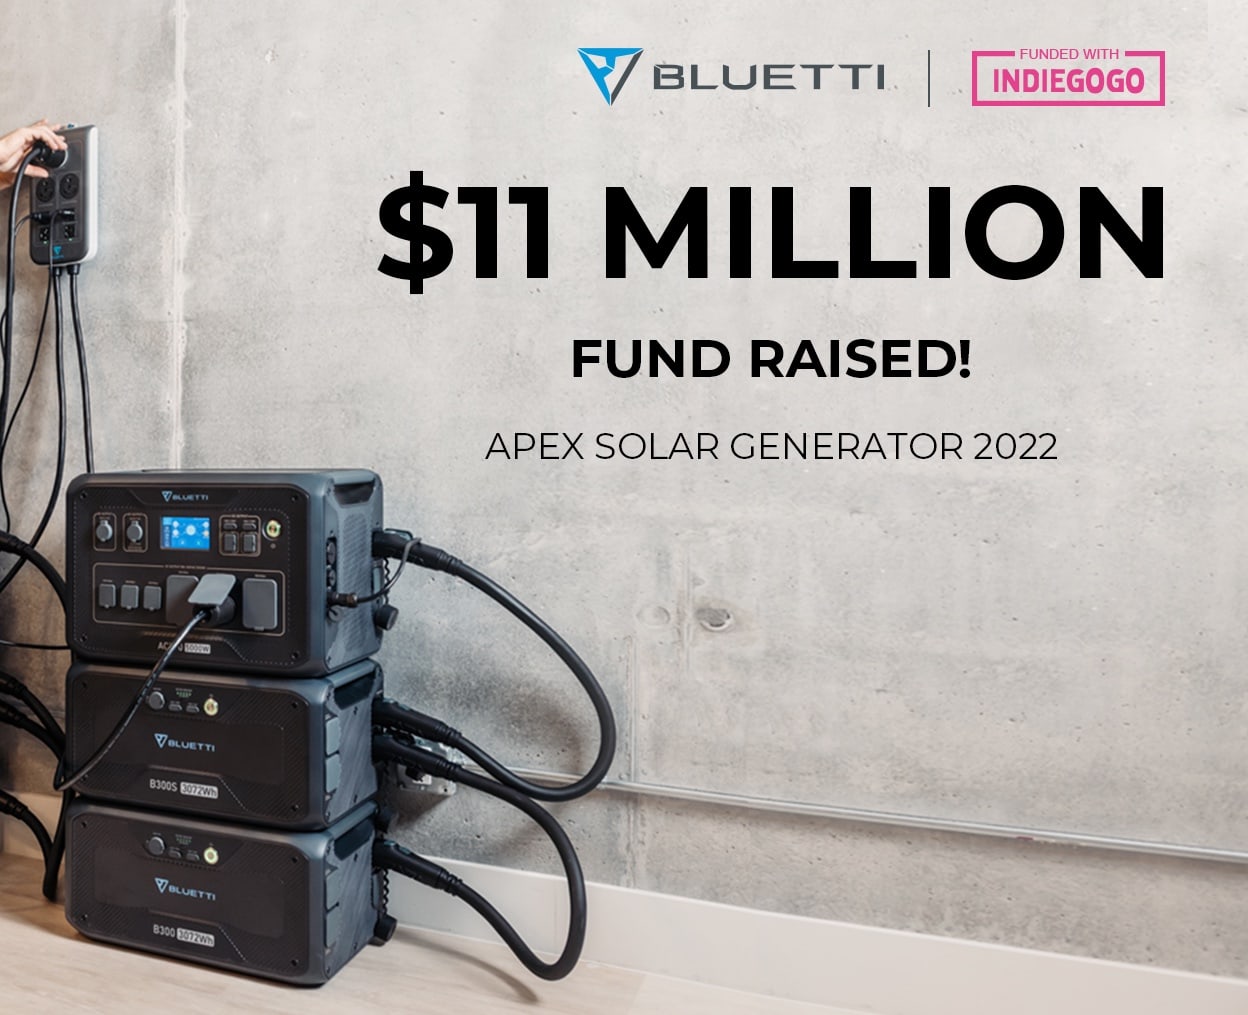 Bluetti's Indiegogo fundraising campaign was an unqualified success.